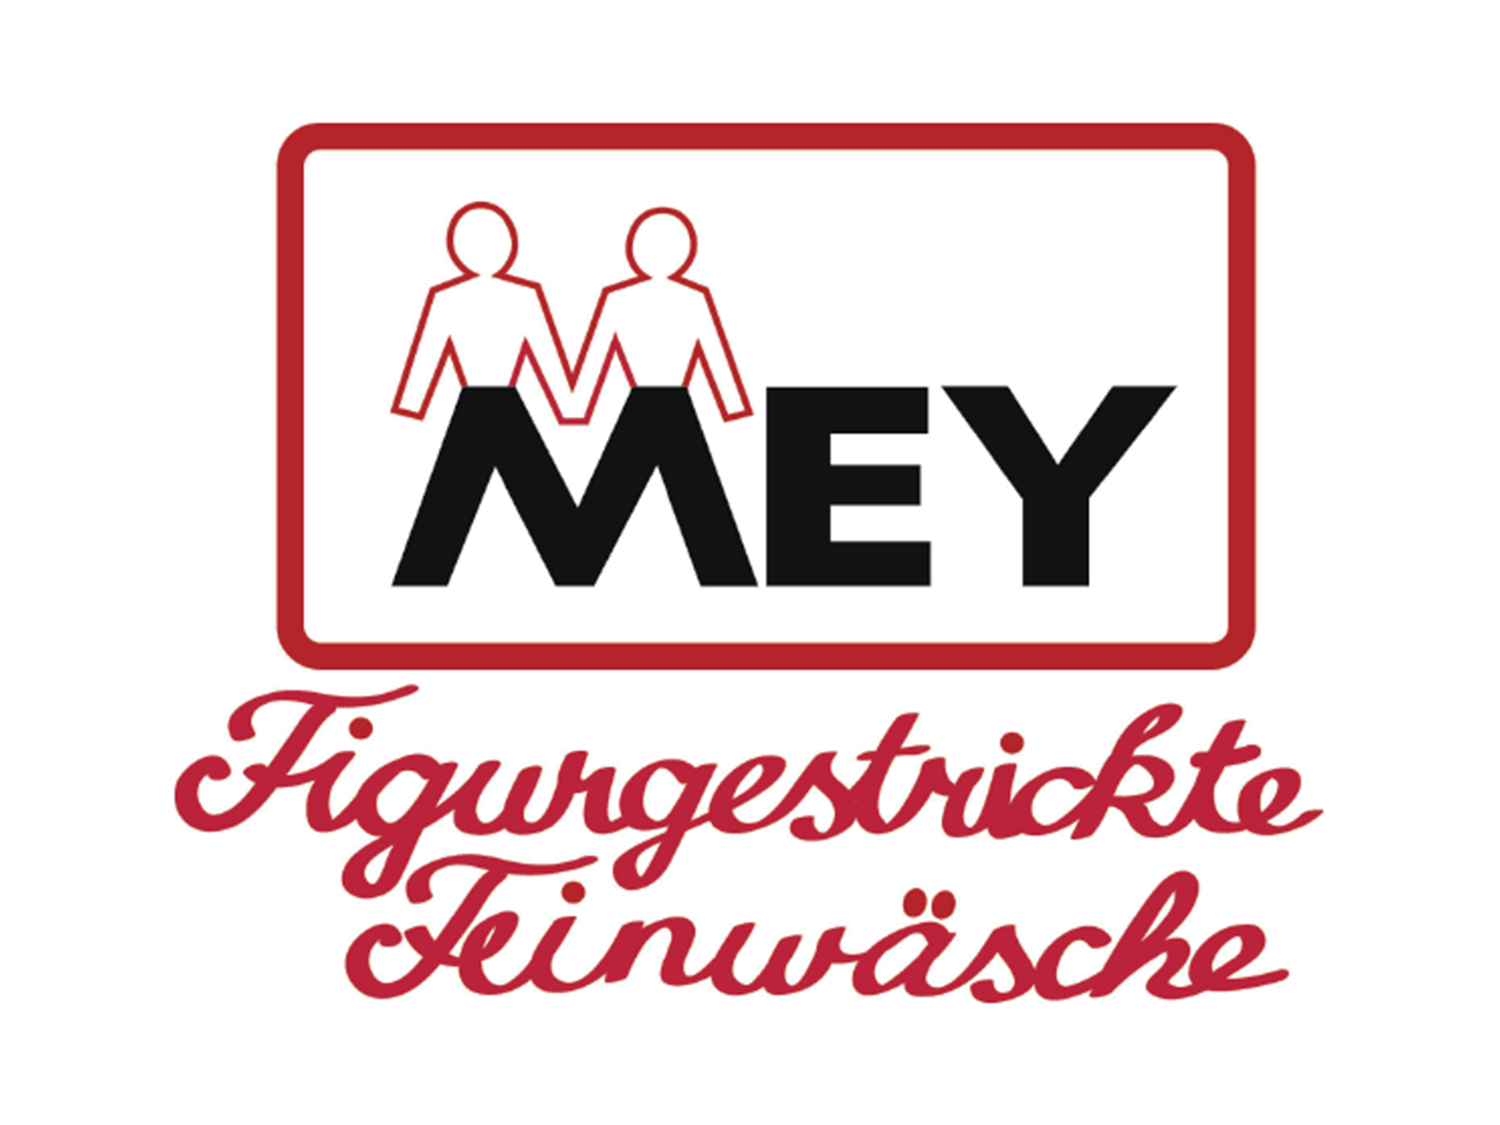 Old mey® company logo for “MEY Figurgestrickte Feinwäsche”, the letter M forms the shape of two people | mey®